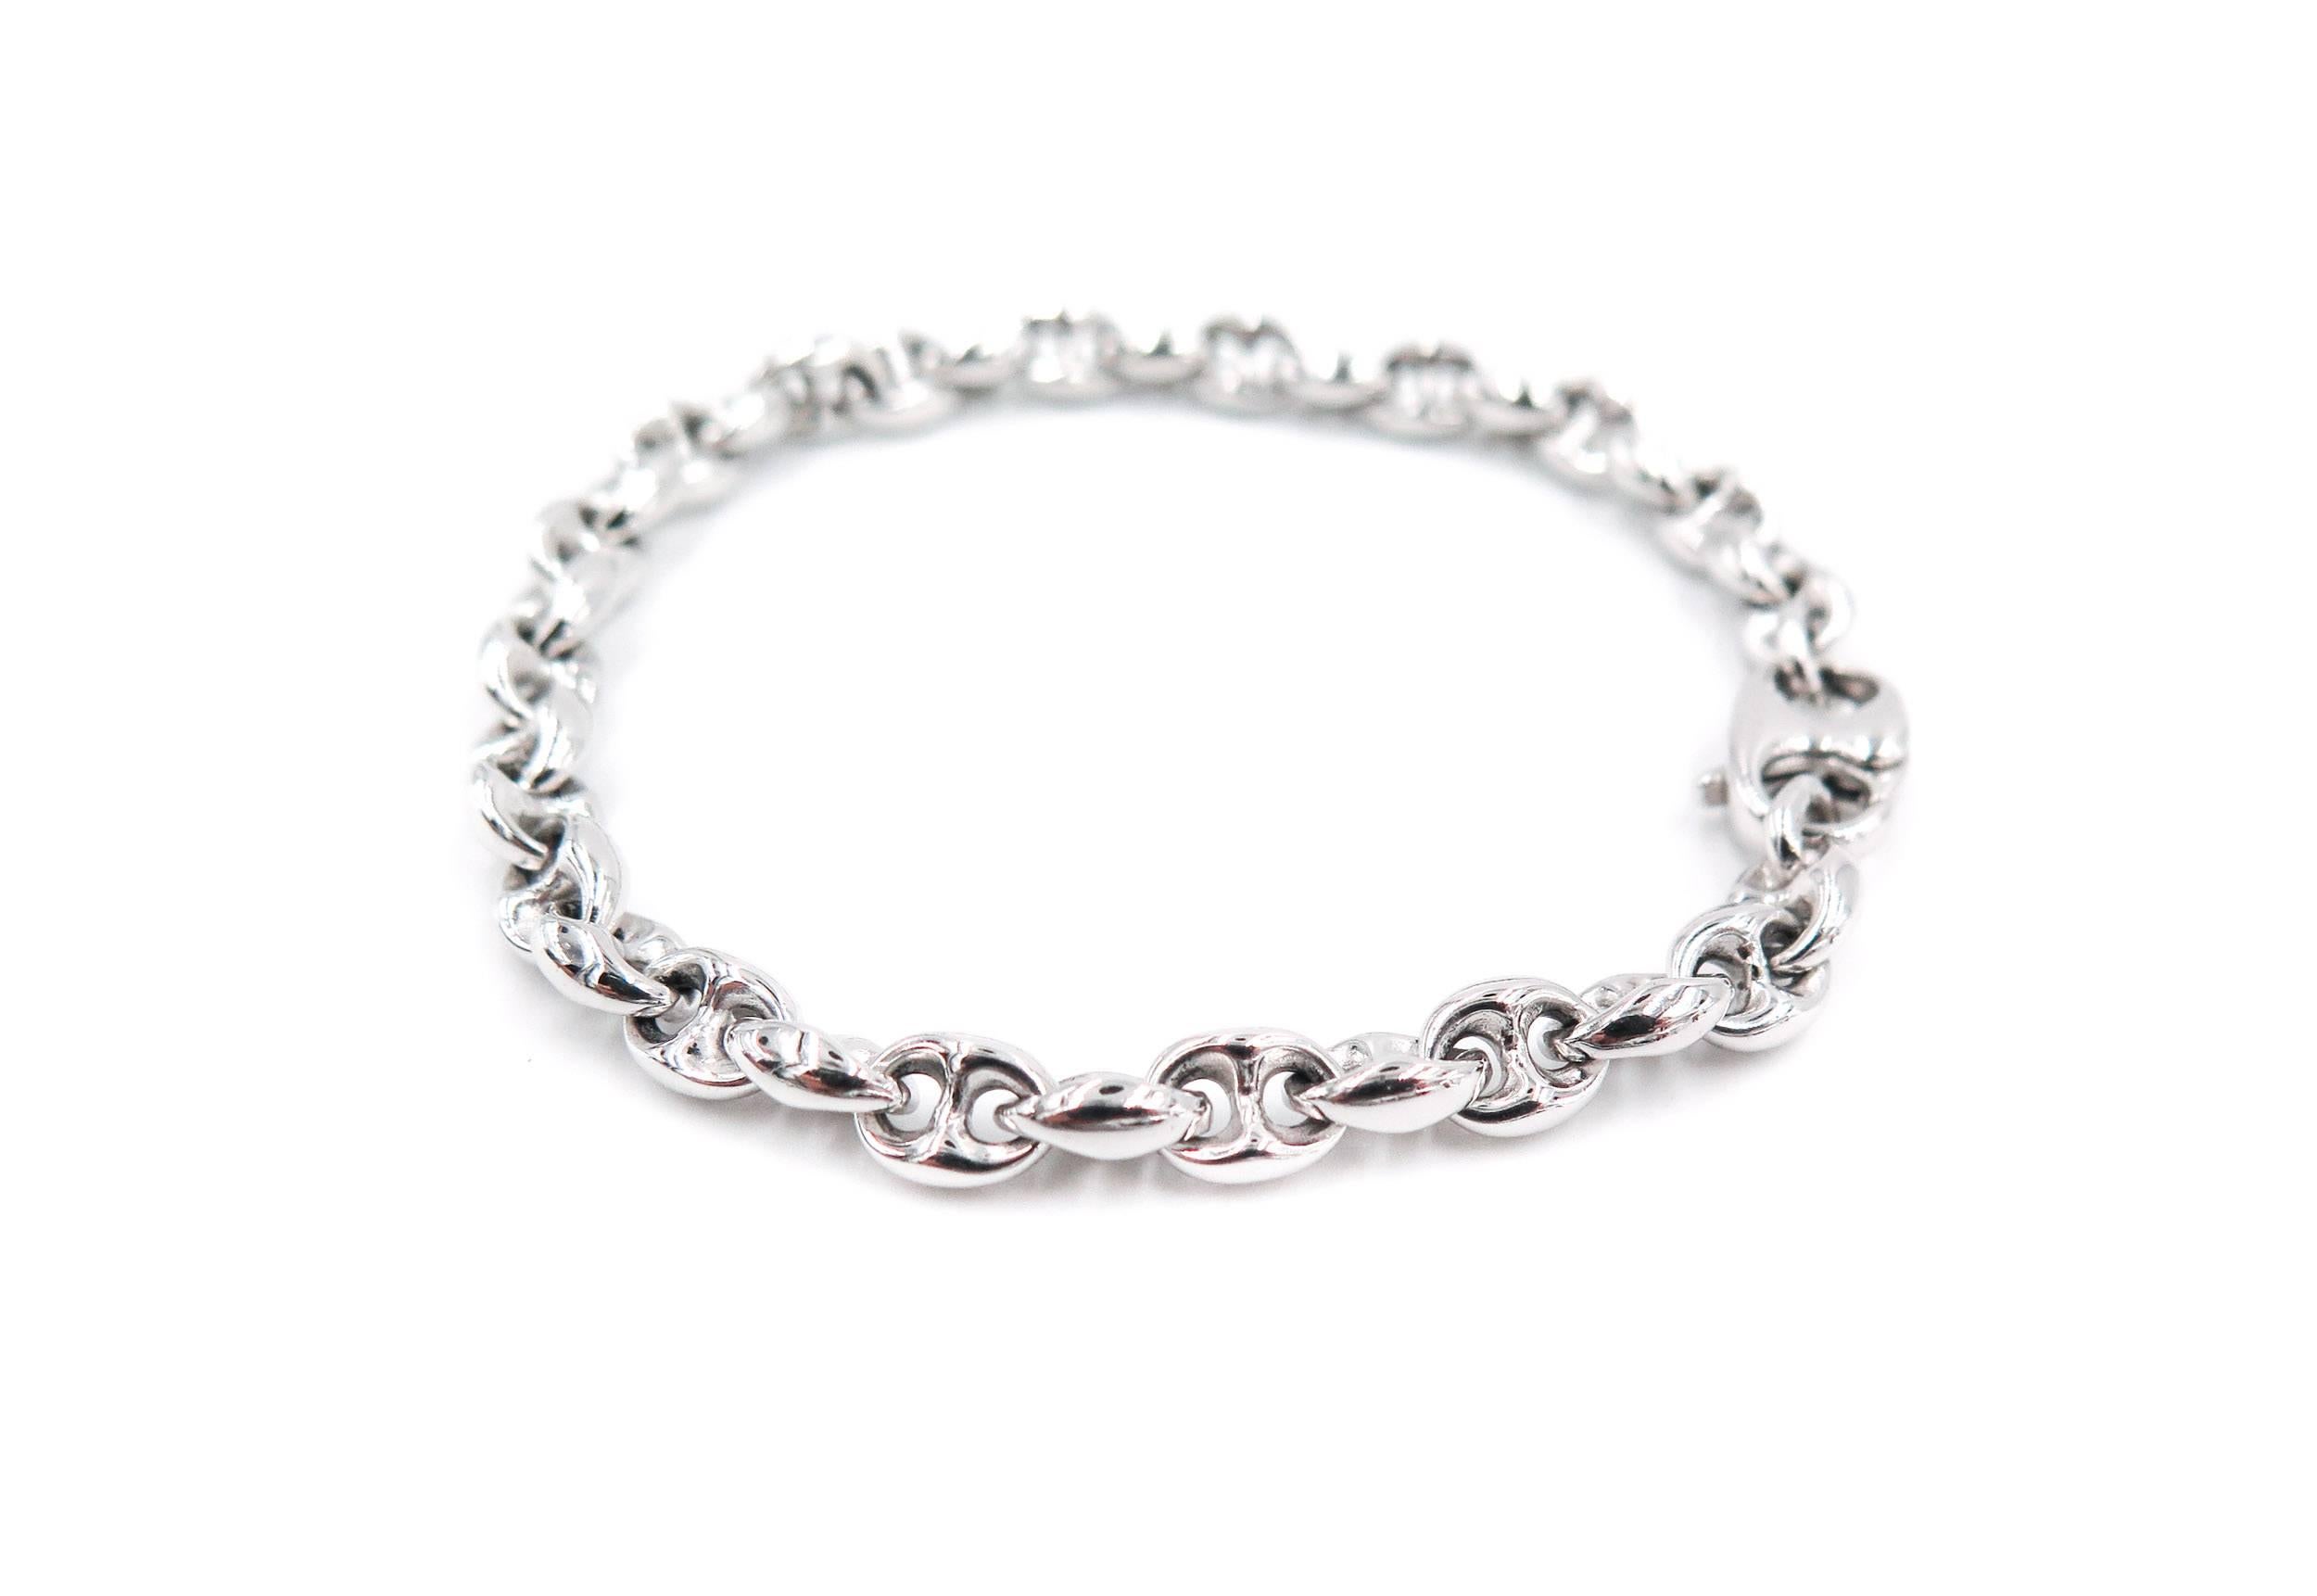  Beautifully designed solid 18K white gold marine link bracelet with same style clasp. 
The bracelet is 7.25 inches long and weight 22.20 grams.